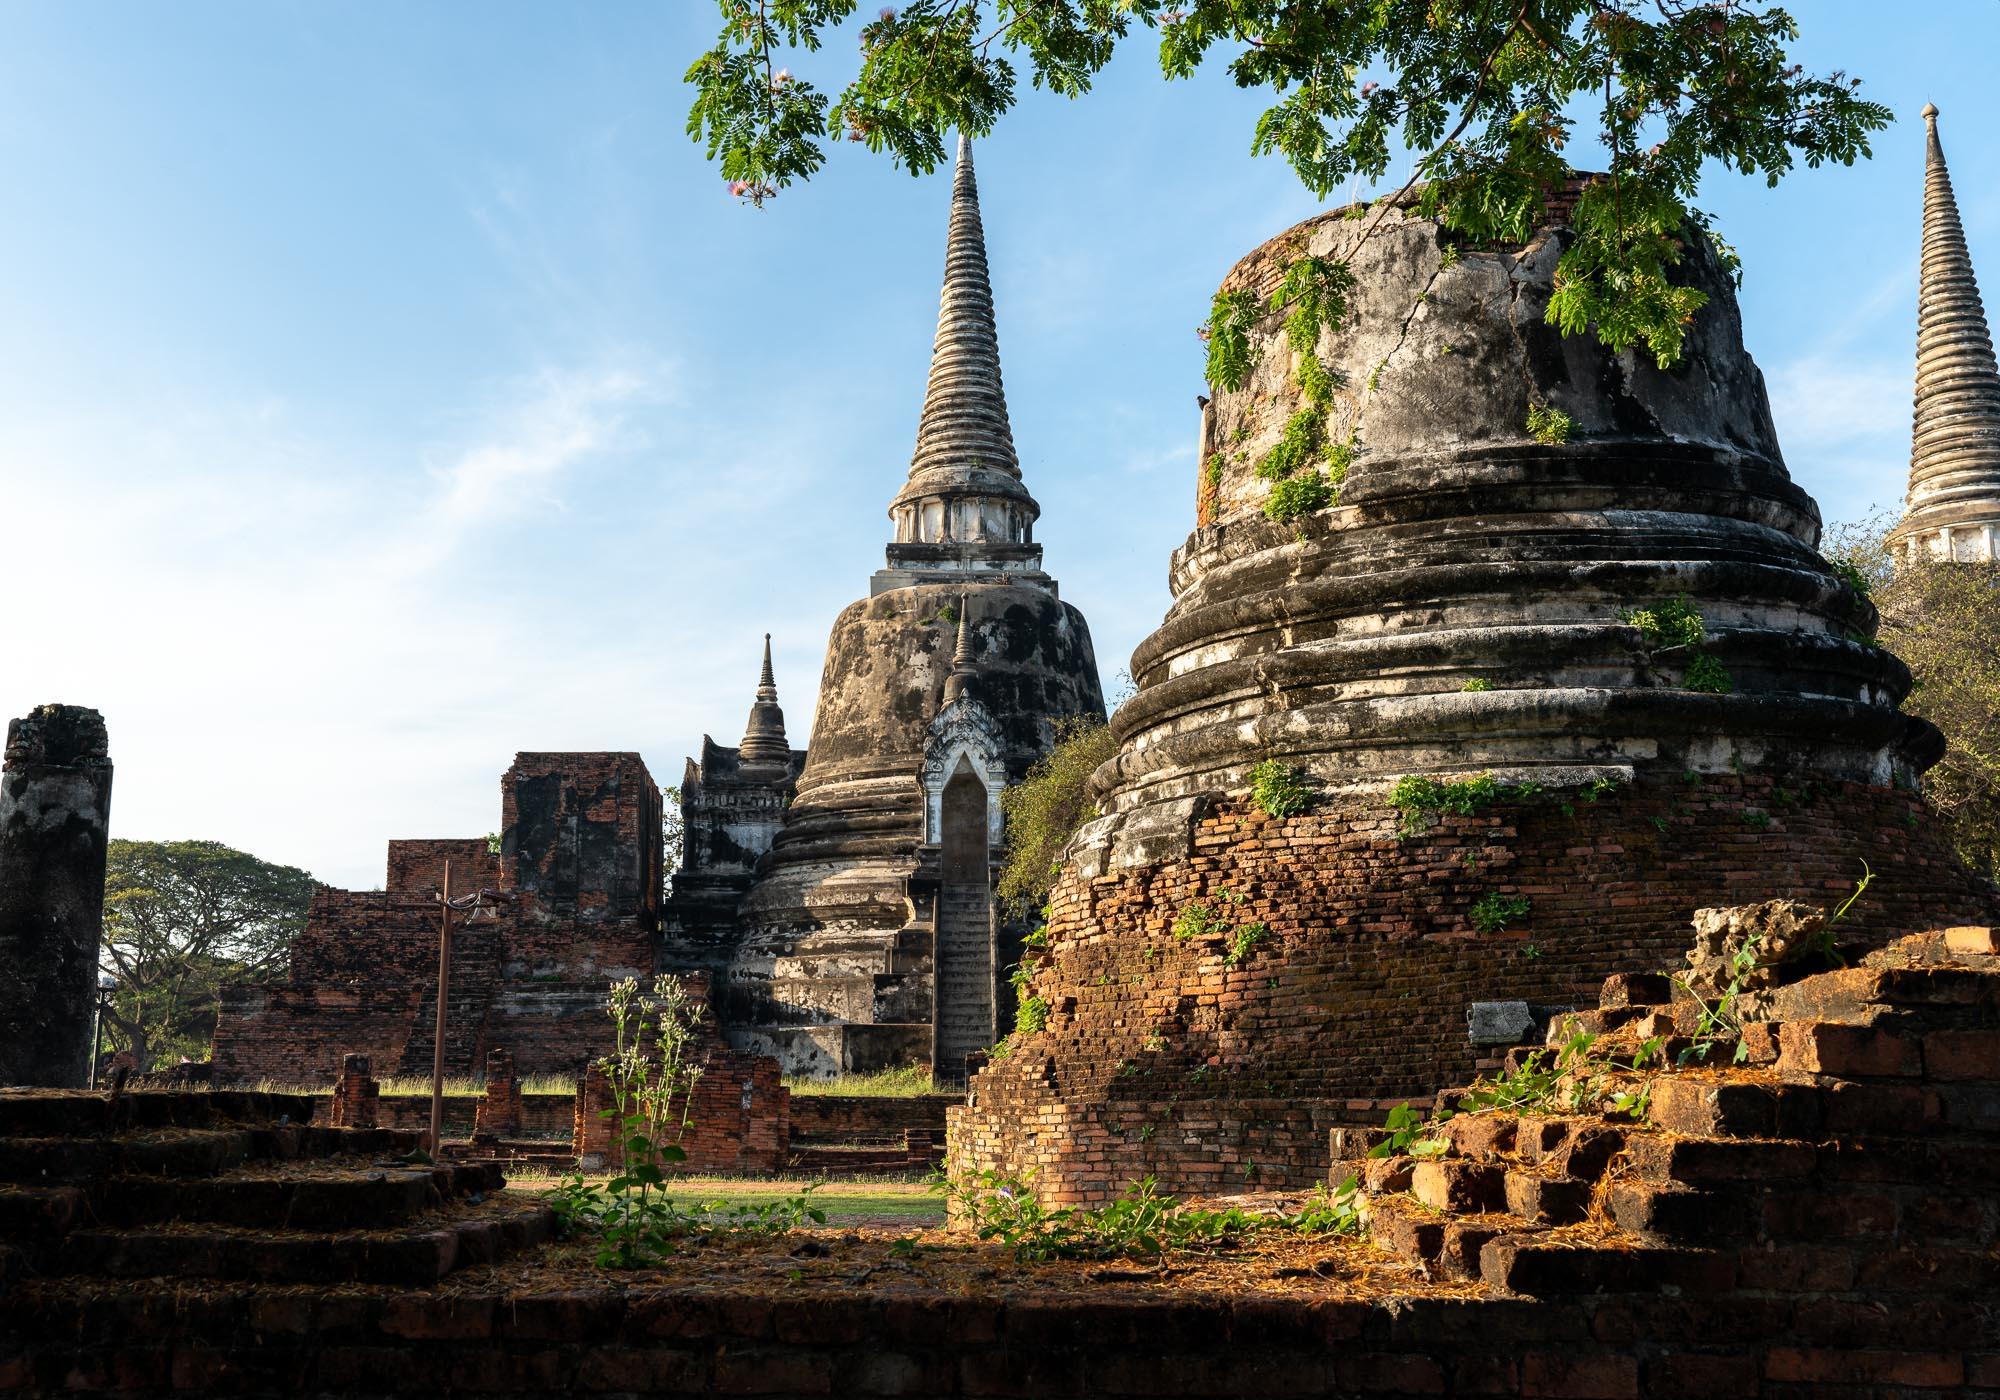 Wat Phra Si Sanphet was built on the site of the original Royal Palace, which moved to an adjacent site in the mid-15th century. – © Michael Turtle